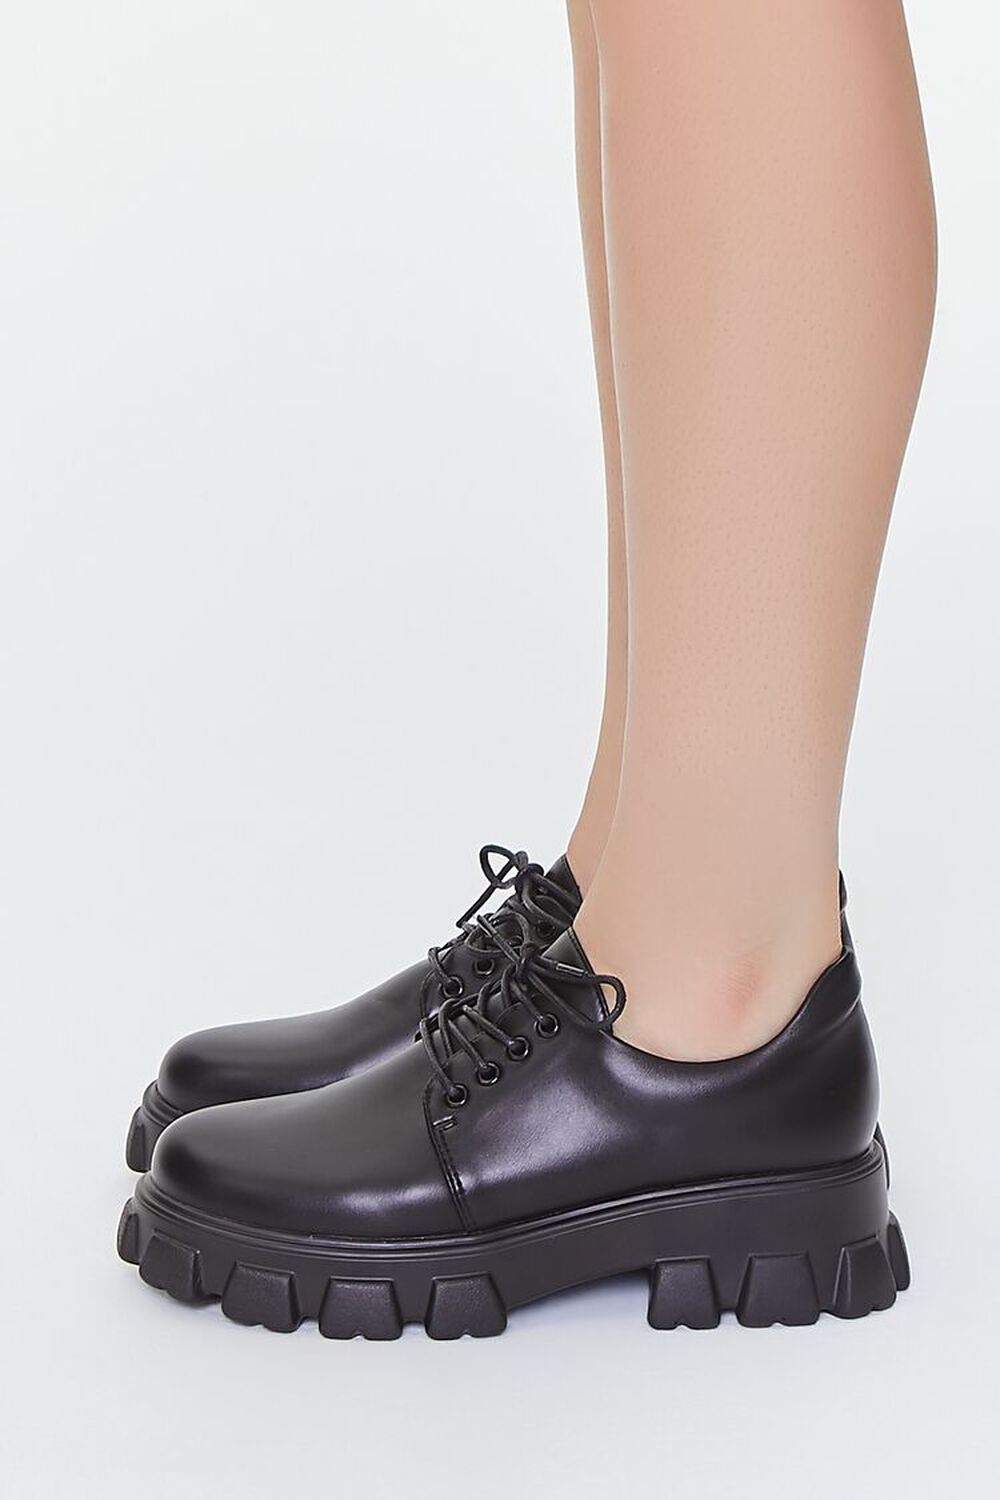 Forever 21 Faux Leather Platform Oxfords  Shoes with leggings, Oxford shoes  outfit, Women shoes